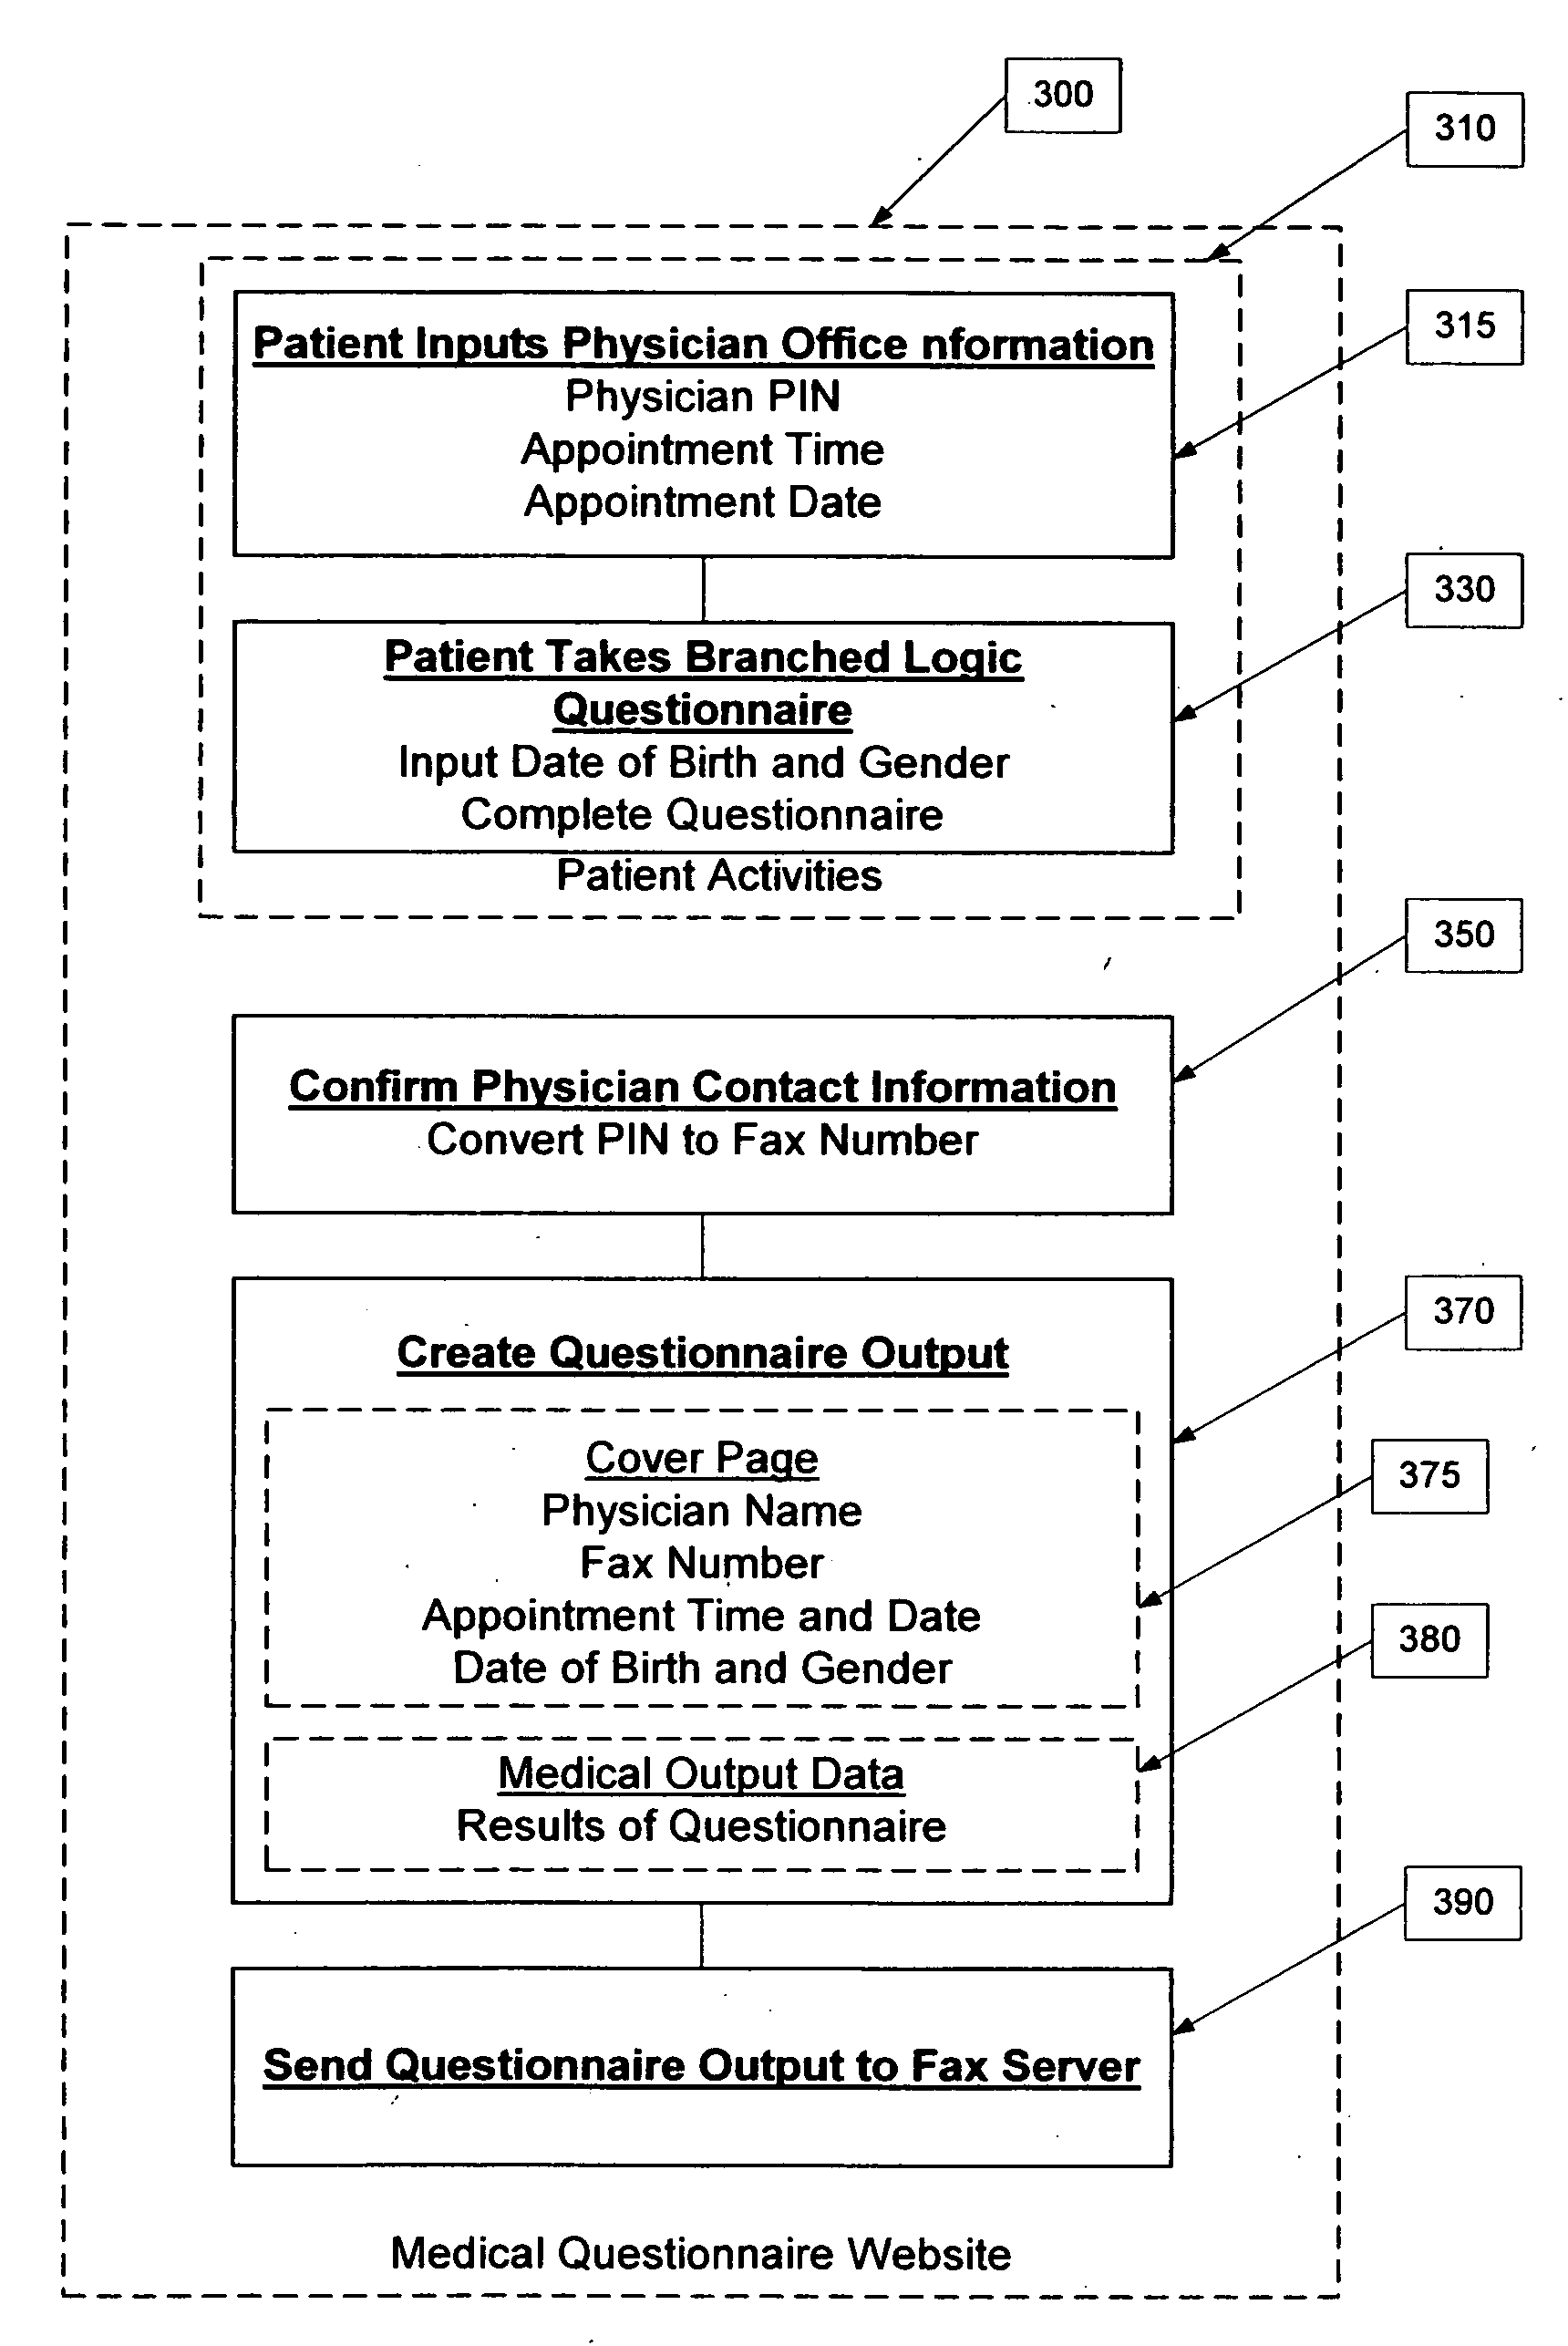 System and method to administer a patient specific anonymous medical questionnaire over the public Internet using manual decryption of user information